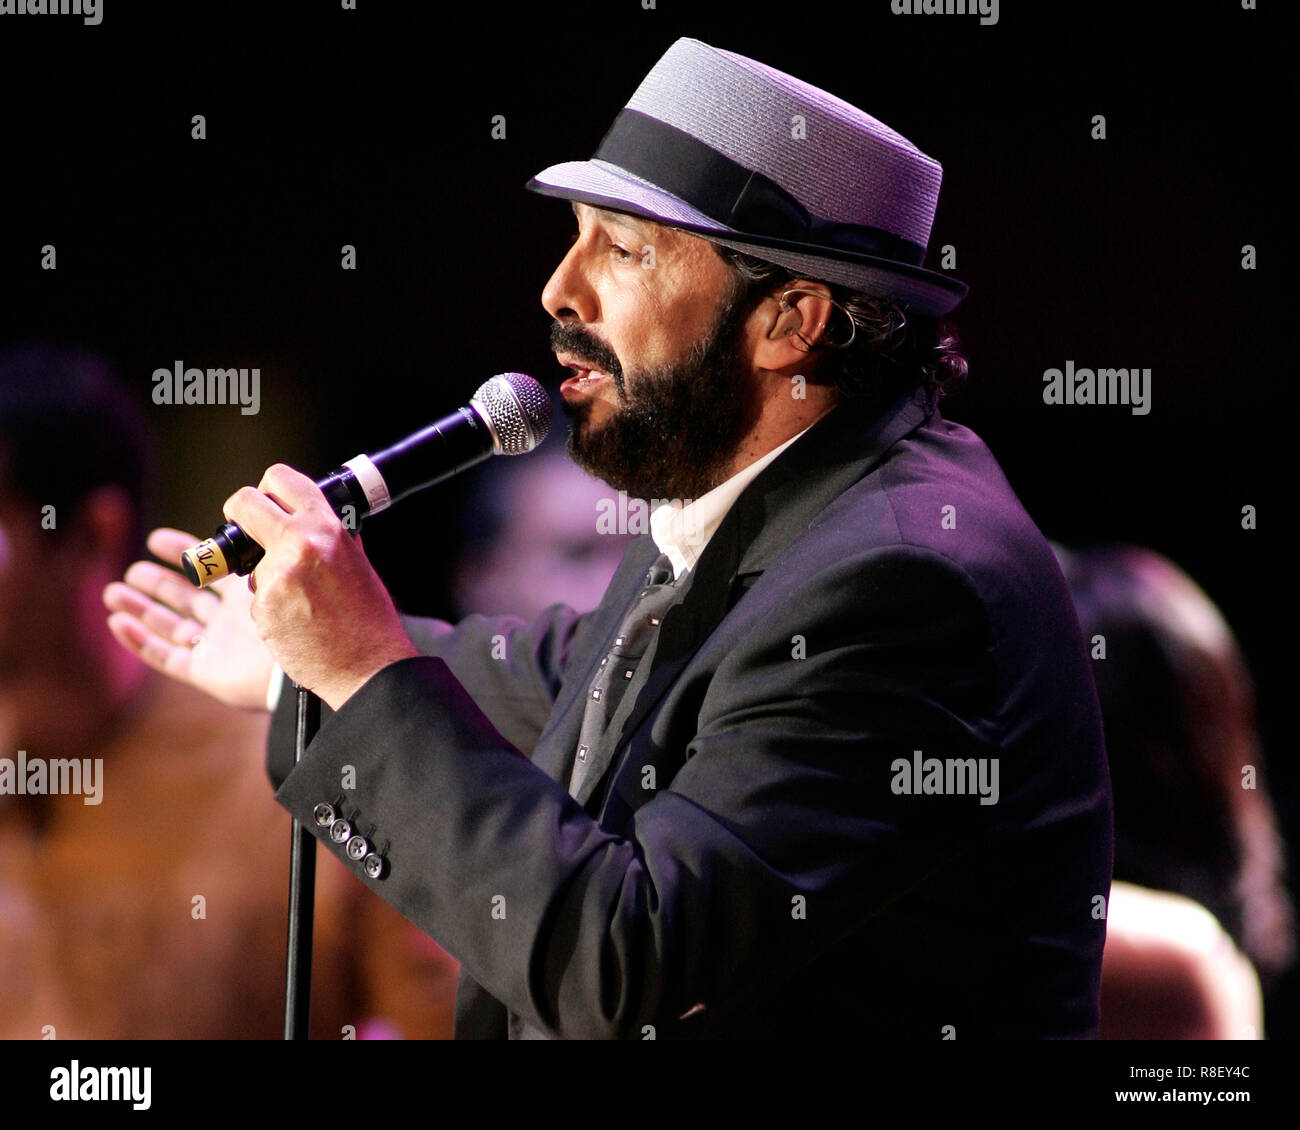 Juan Luis Guerra performs in concert during the Viva Romance show at the American Airlines Arena in Miami, on February  3, 2006. Stock Photo